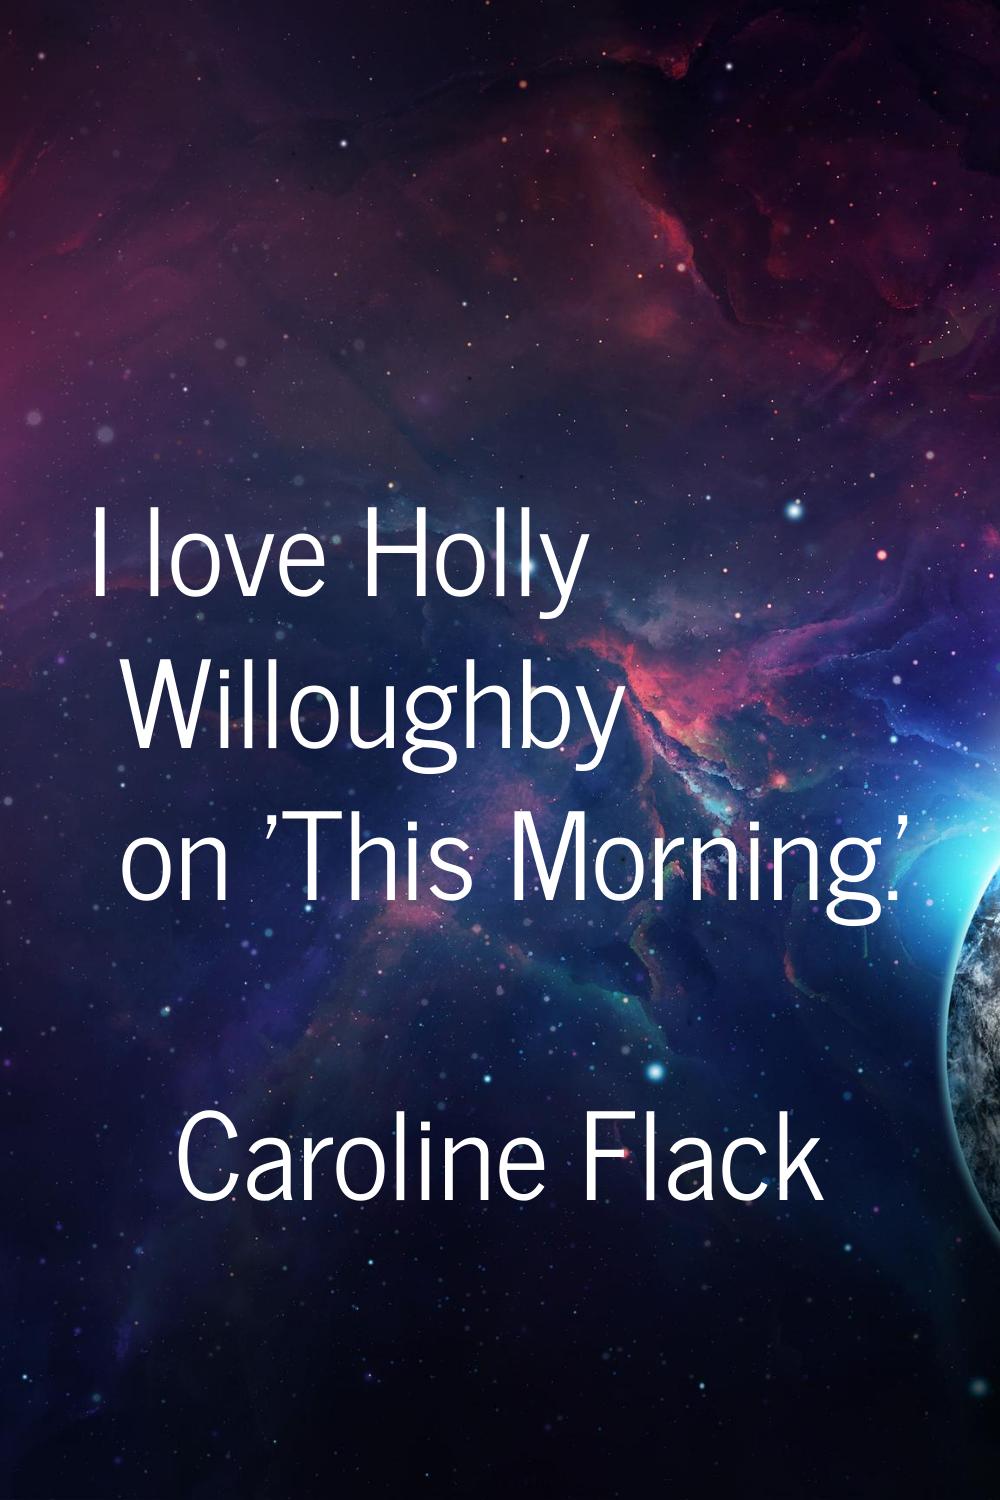 I love Holly Willoughby on 'This Morning.'